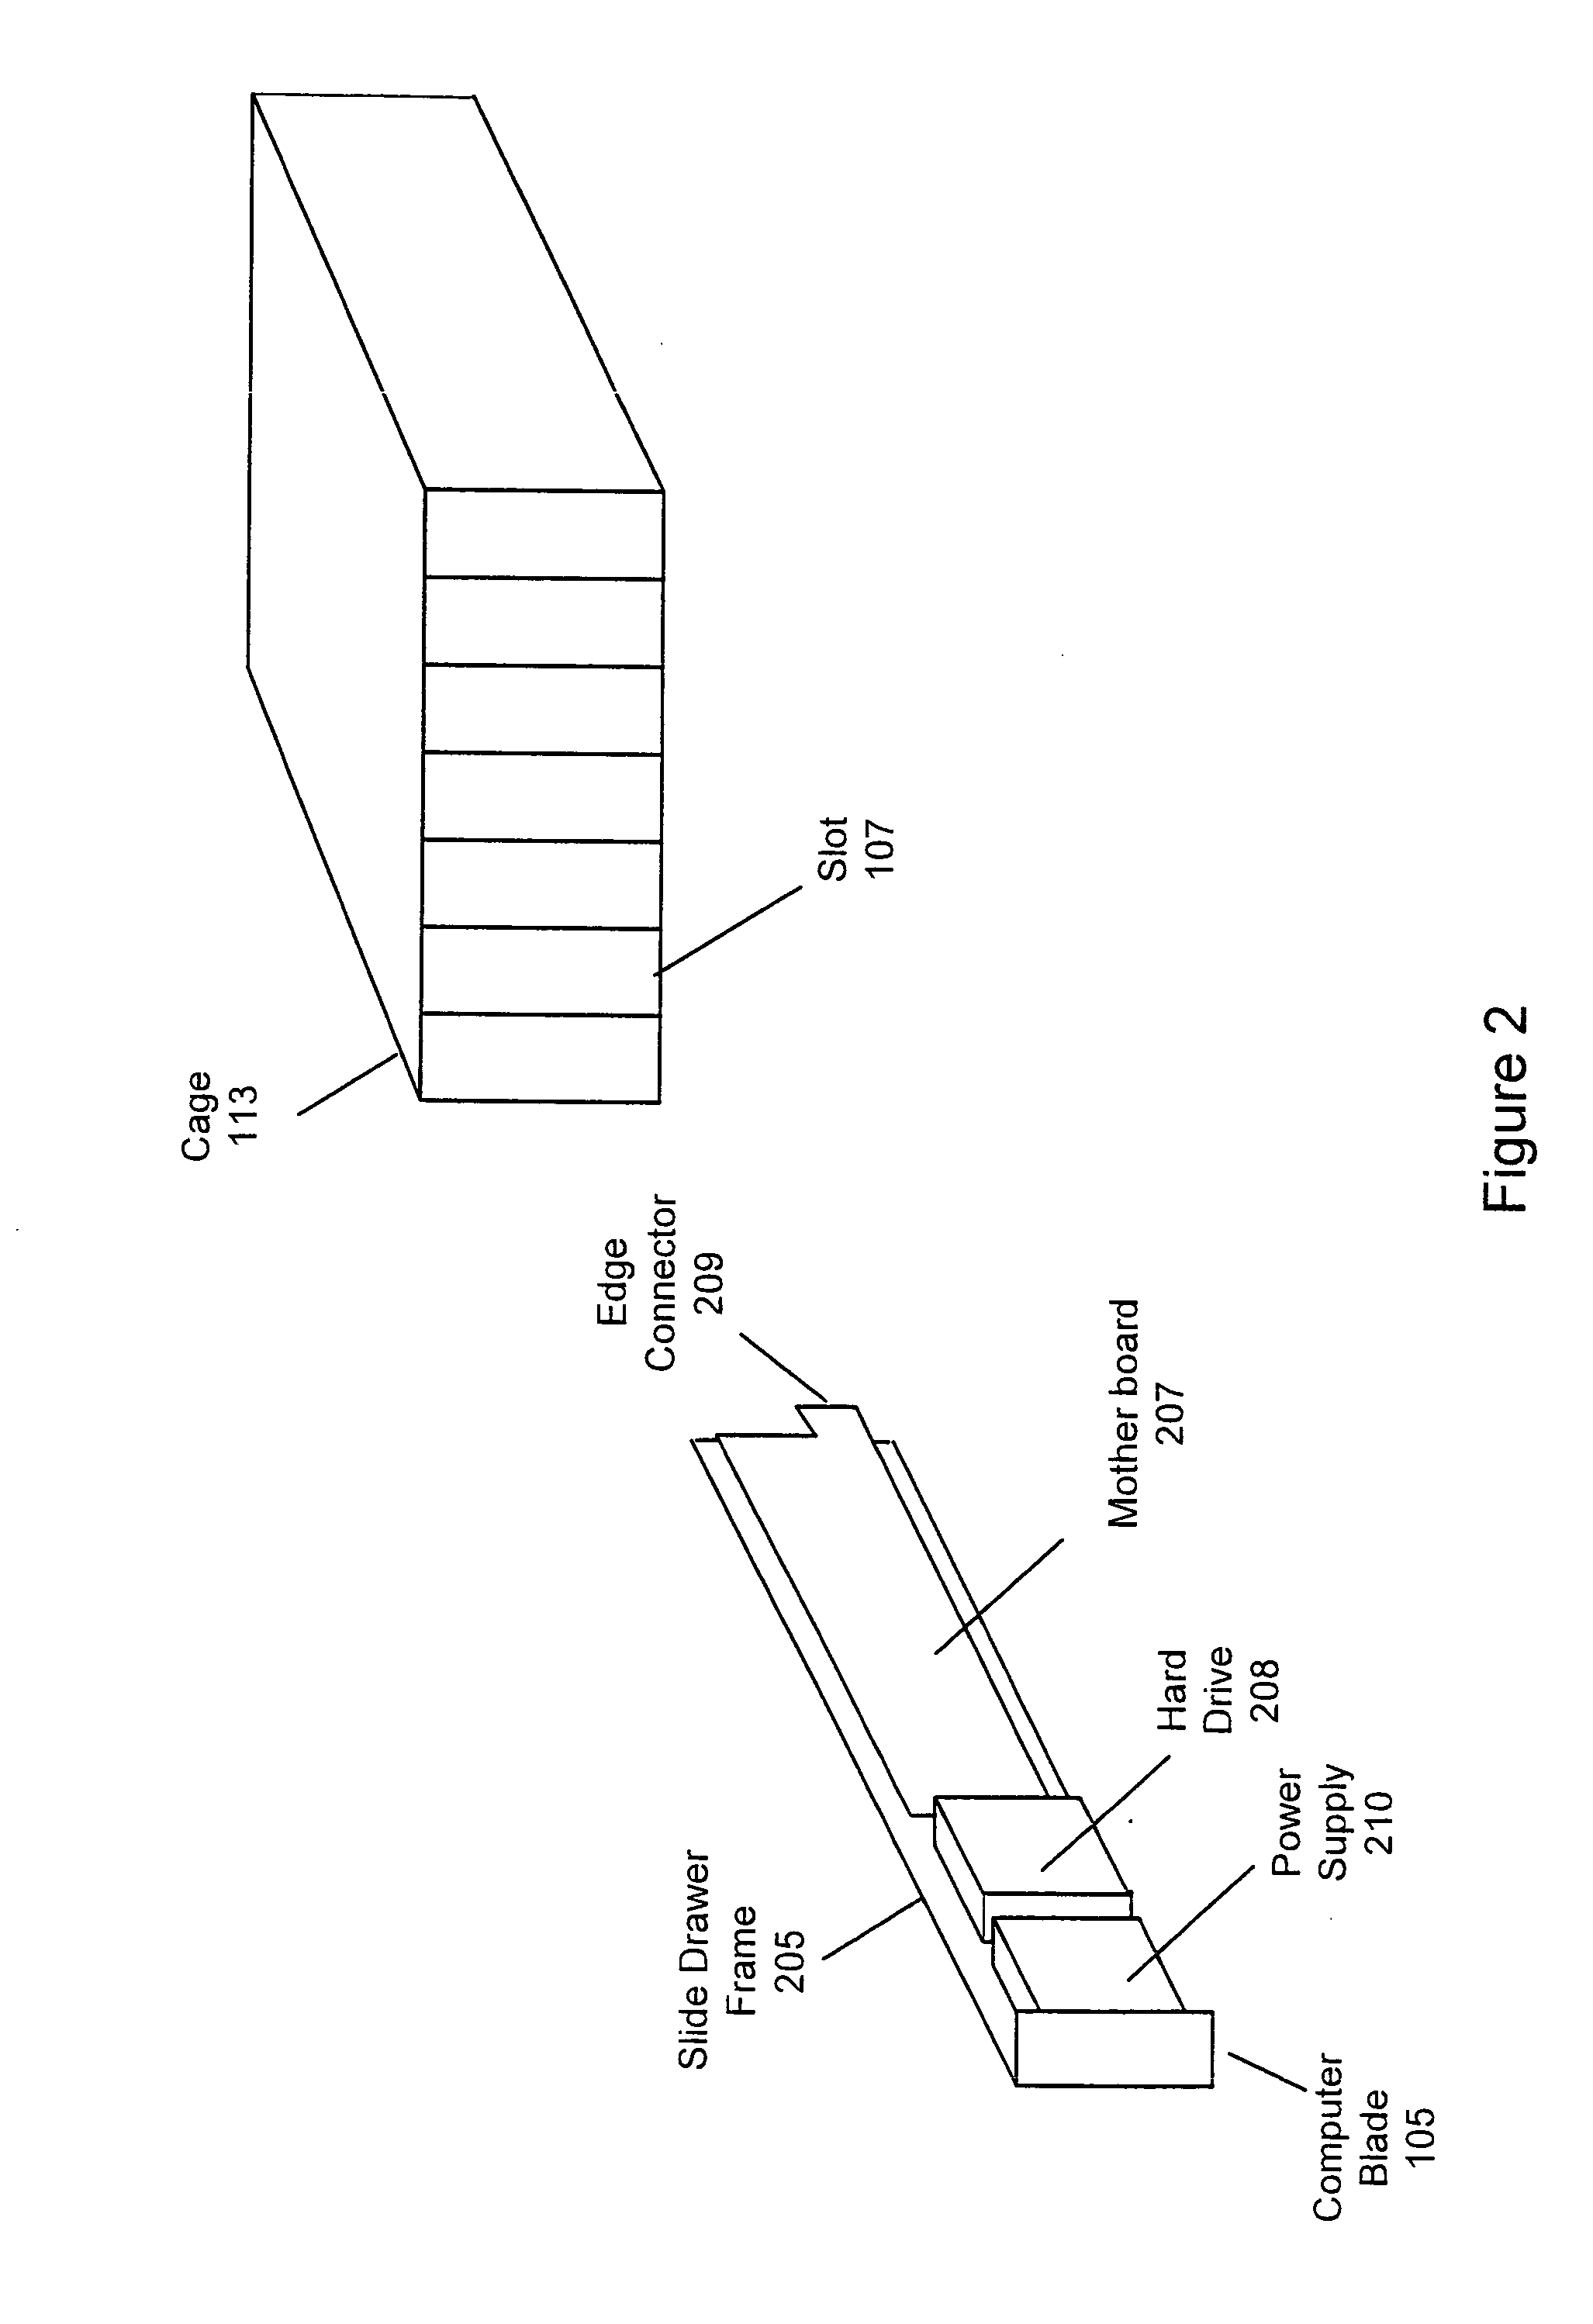 System and method for creating complex distributed applications